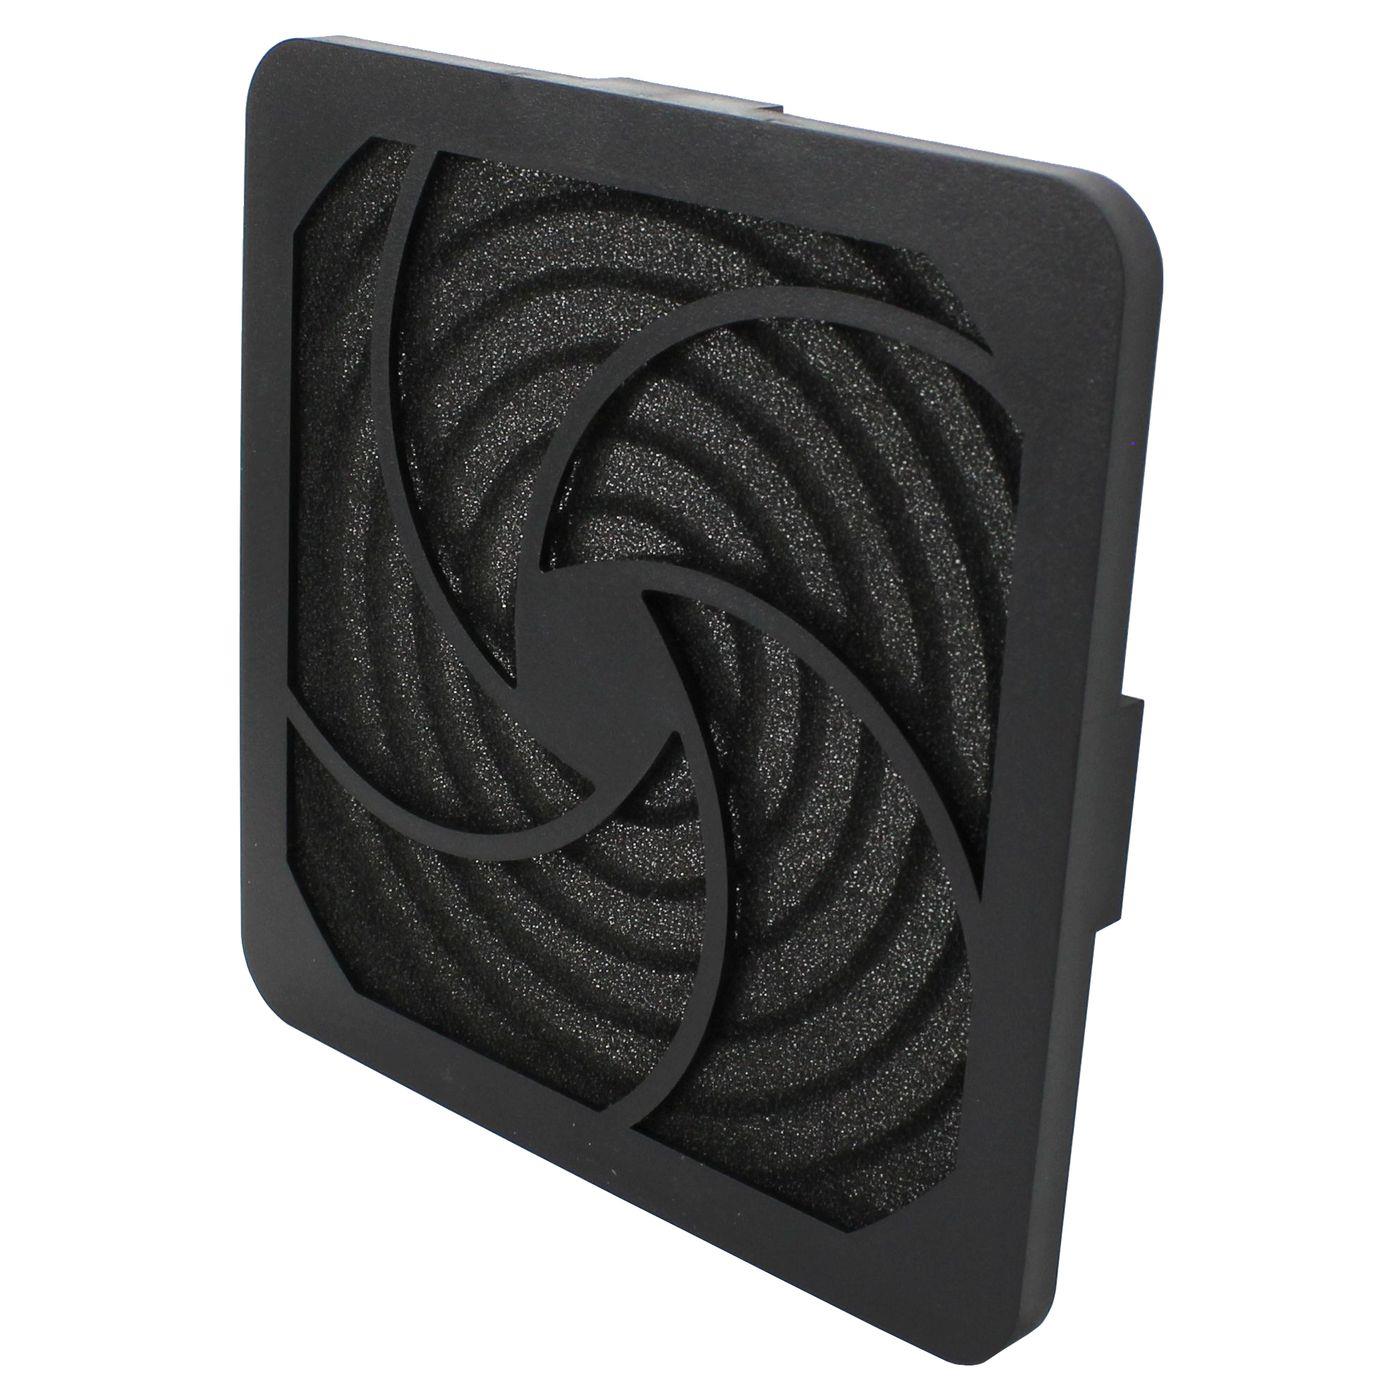 Fan grille + Dust filter 120x120mm 45ppi 3-part spin-on filter